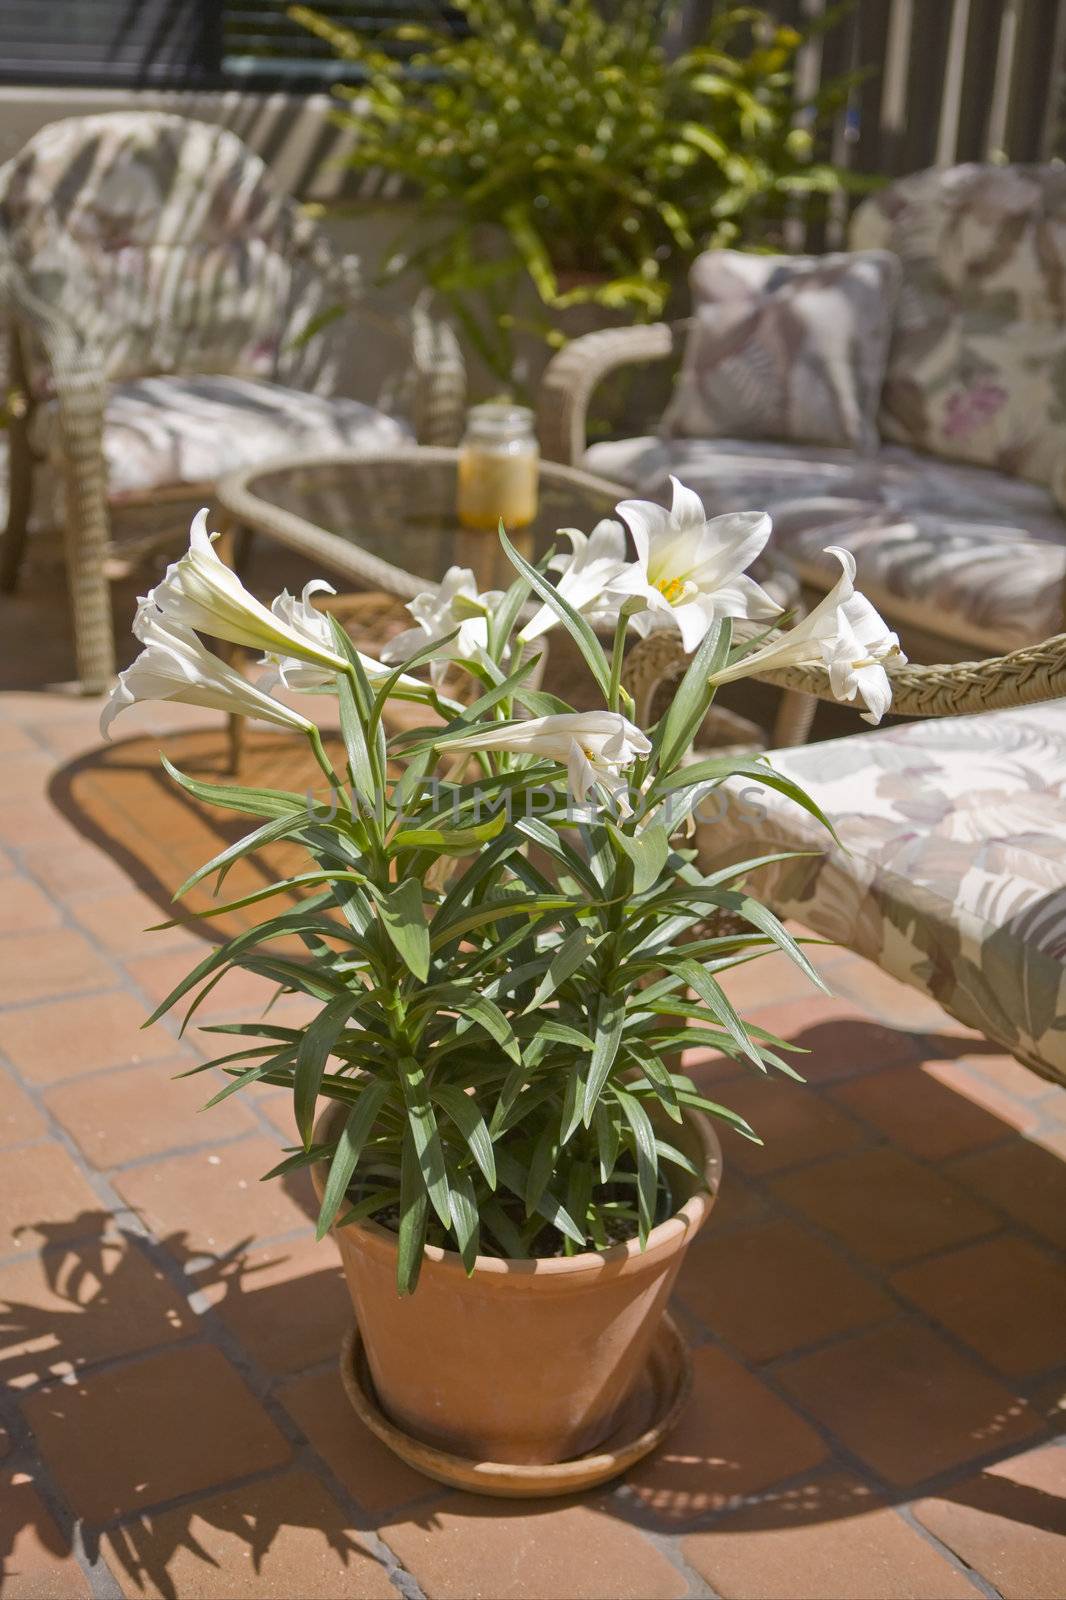 Potted Lily on an Outdoor Patio by KevinPanizza